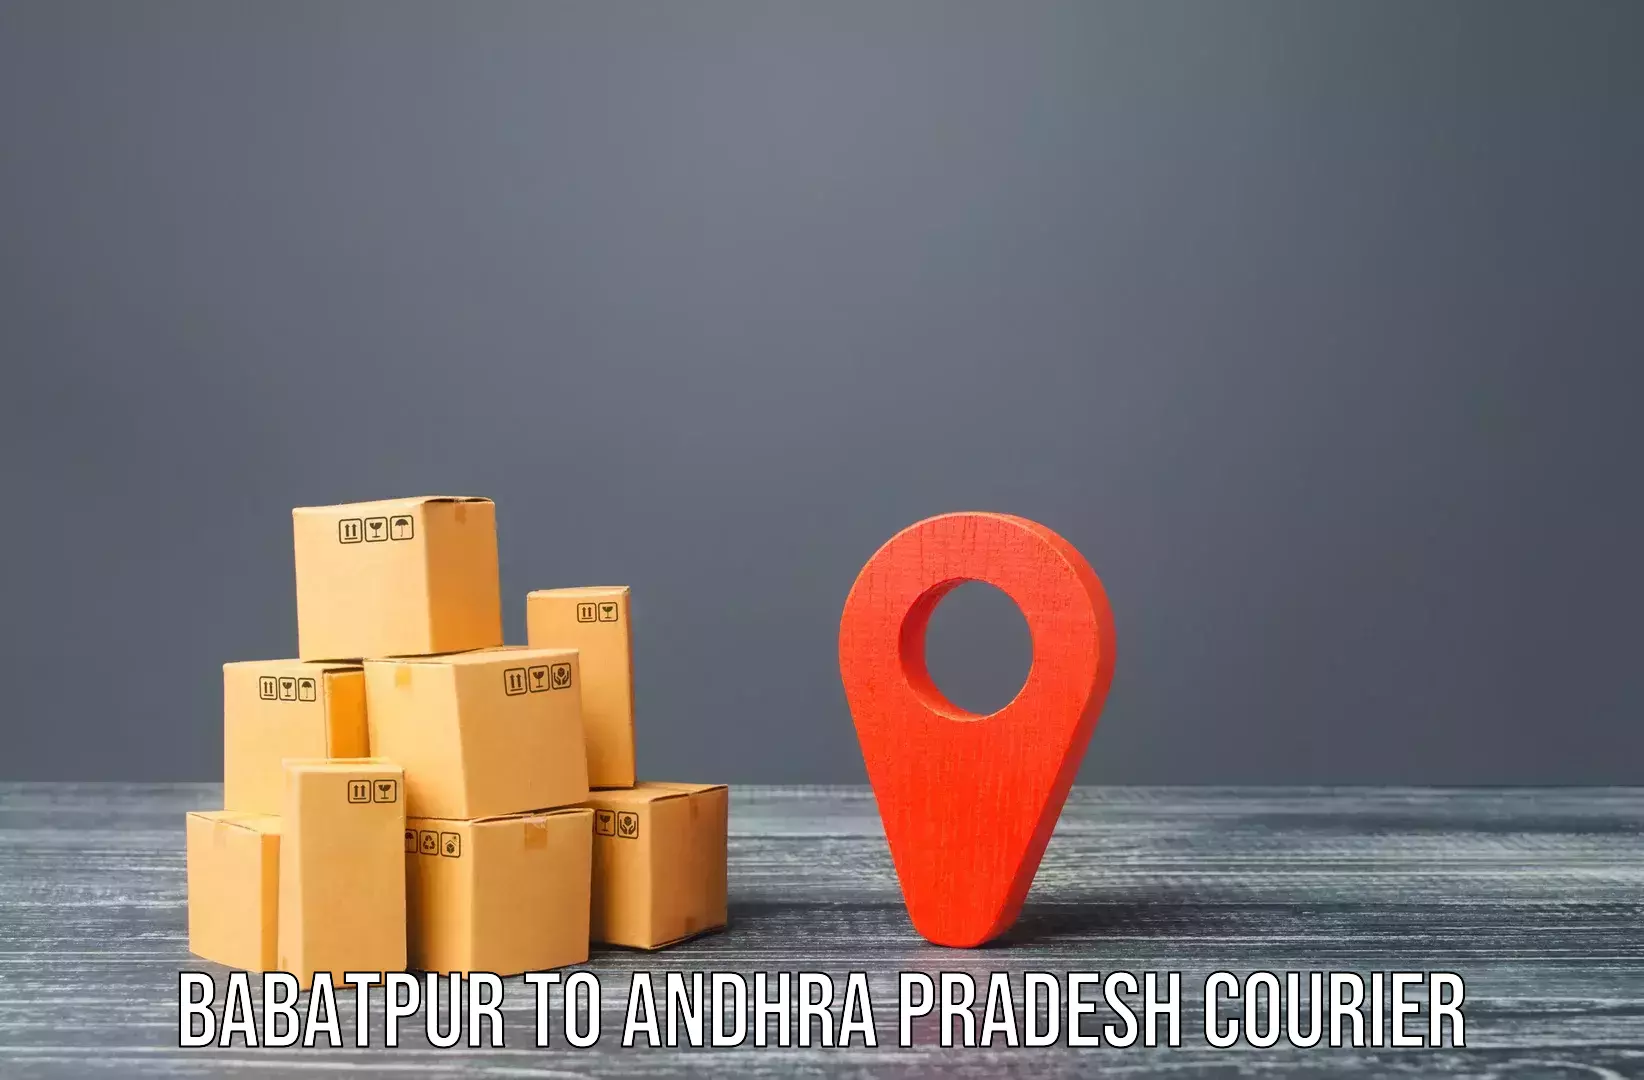 Trusted relocation experts Babatpur to Visakhapatnam Port